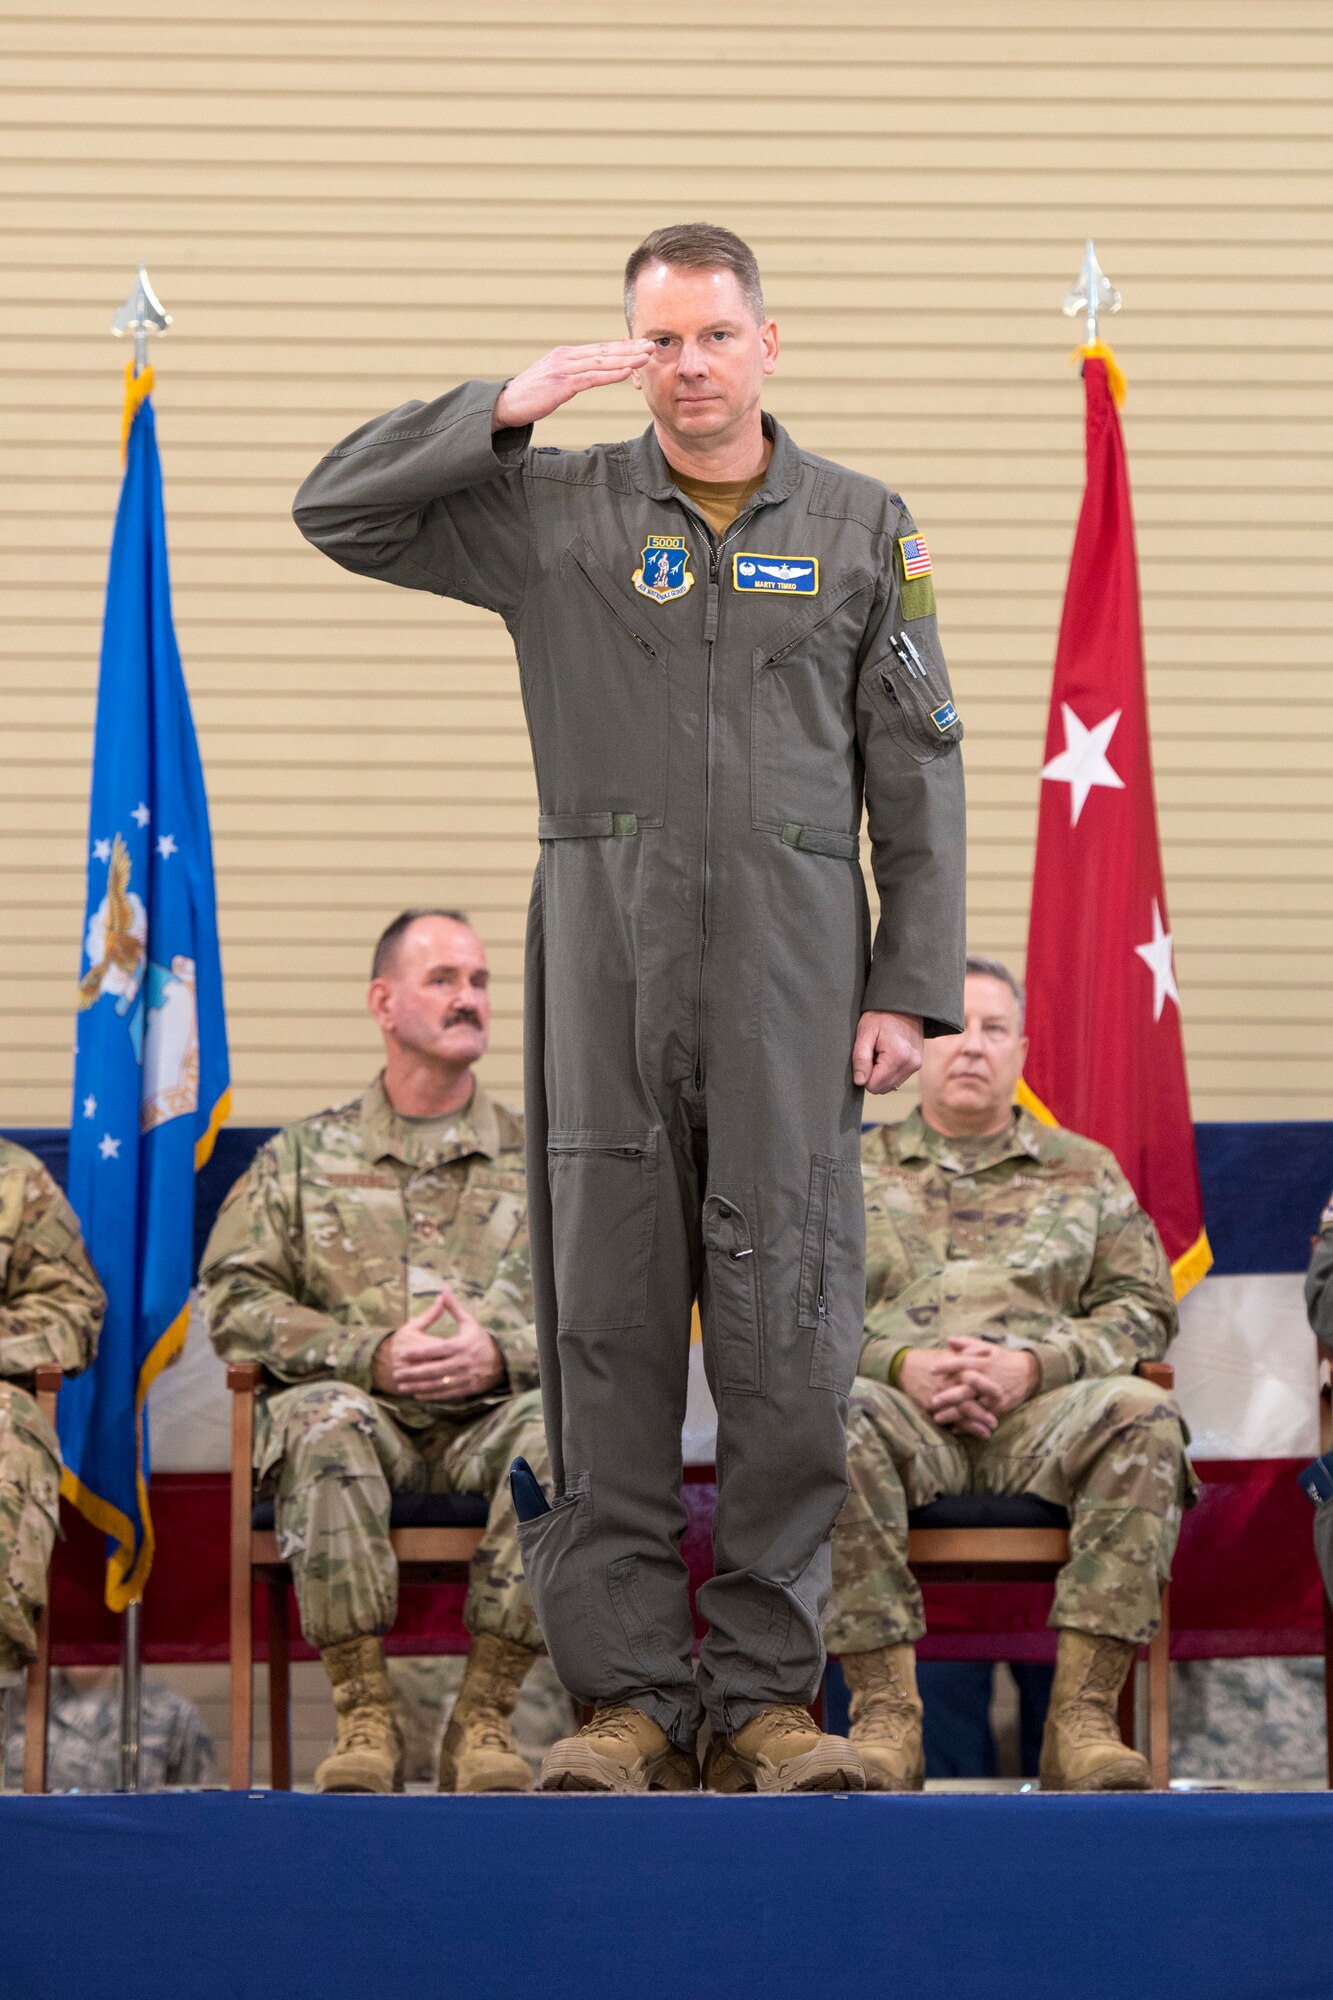 Col. Martin Timko returns a salute to the members of the 167th Airlift Wing as they render their first salute to their new commander during a change of command ceremony, Jan. 12, 2020. Timko assumed command of the wing, Col. David Cochran relinquished command during the ceremony.